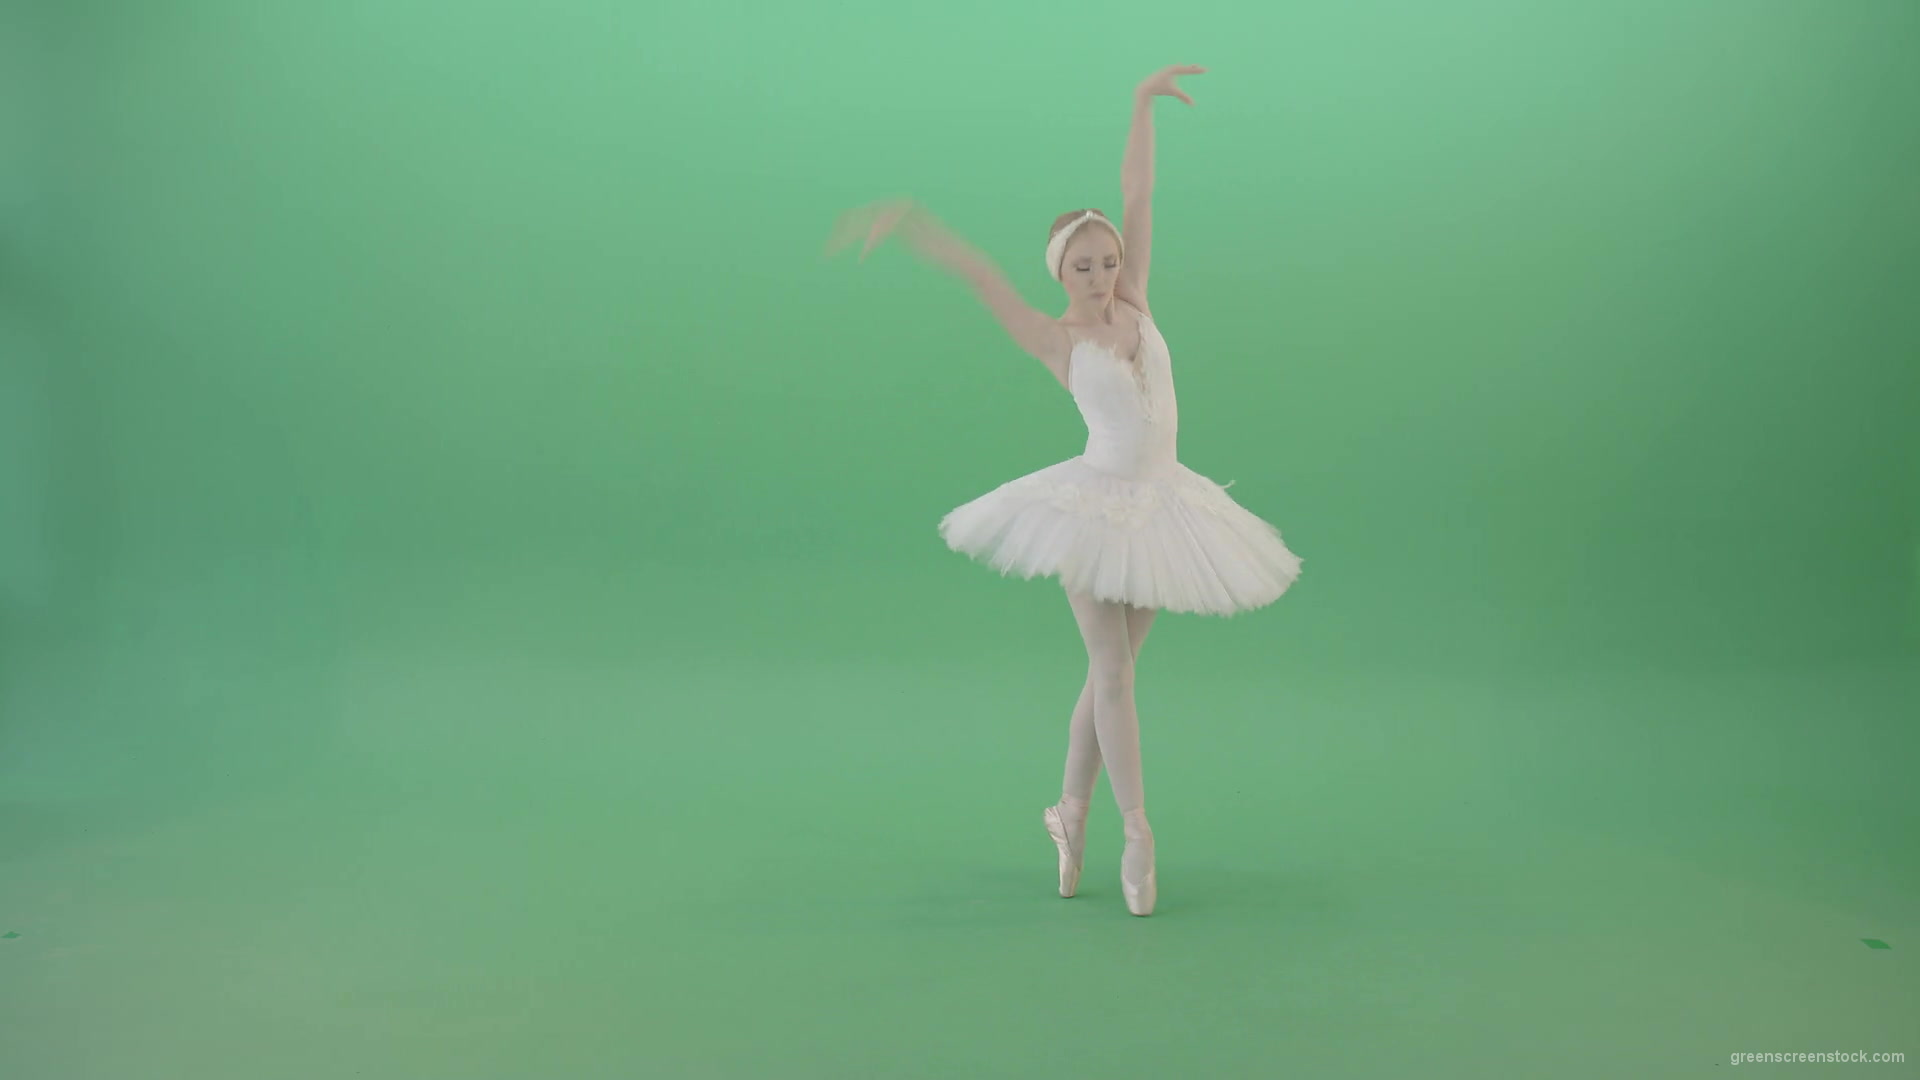 Fashion-snow-white-ballet-dancing-girl-showing-swan-lake-dance-isolated-on-Green-Screen-4K-Video-Footage-1920_005 Green Screen Stock